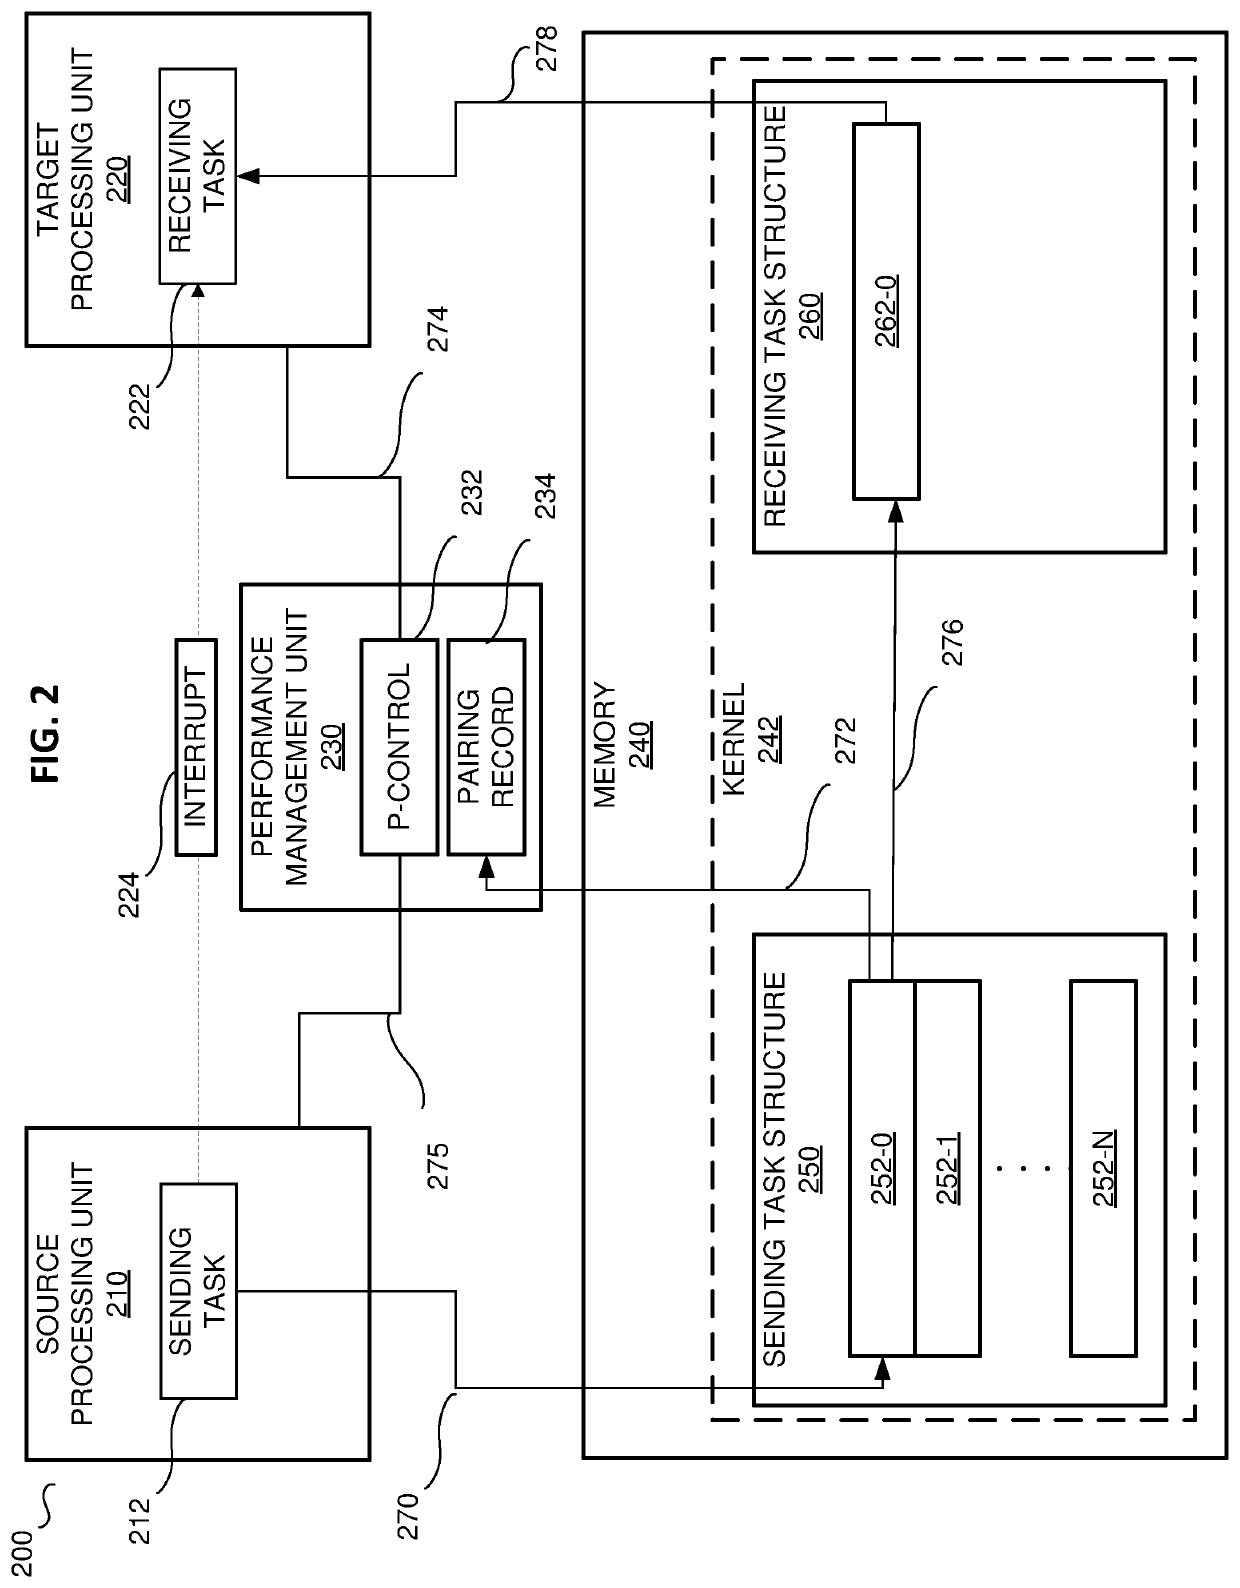 Apparatus and method for performance state matching between source and target processors based on interprocessor interrputs